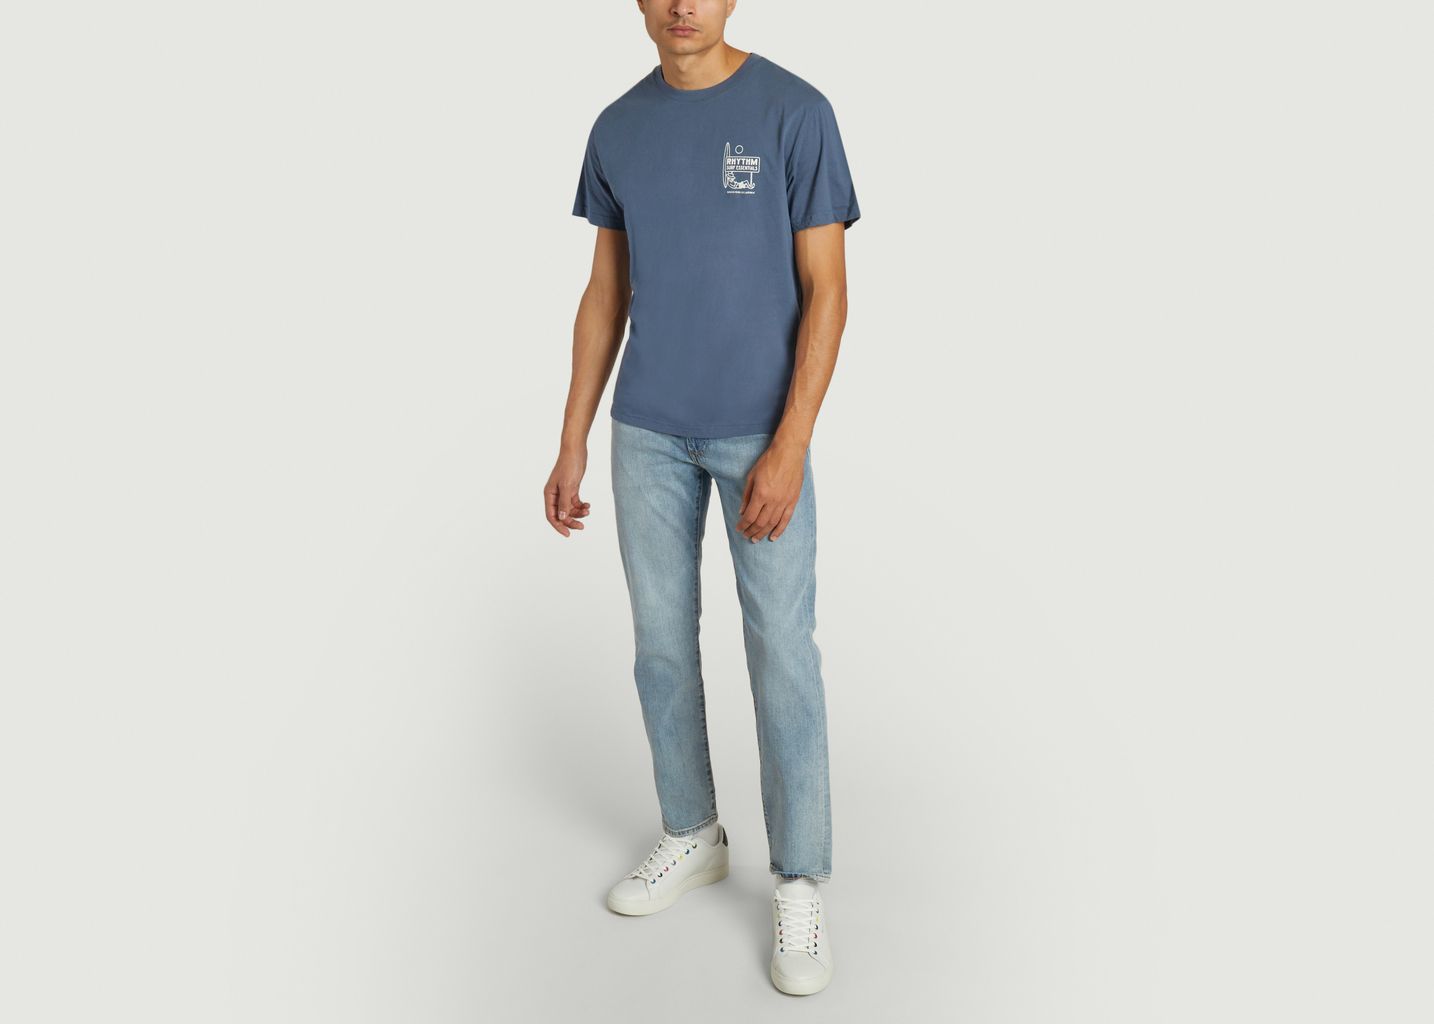 502 tapered jeans - Levi's Red Tab